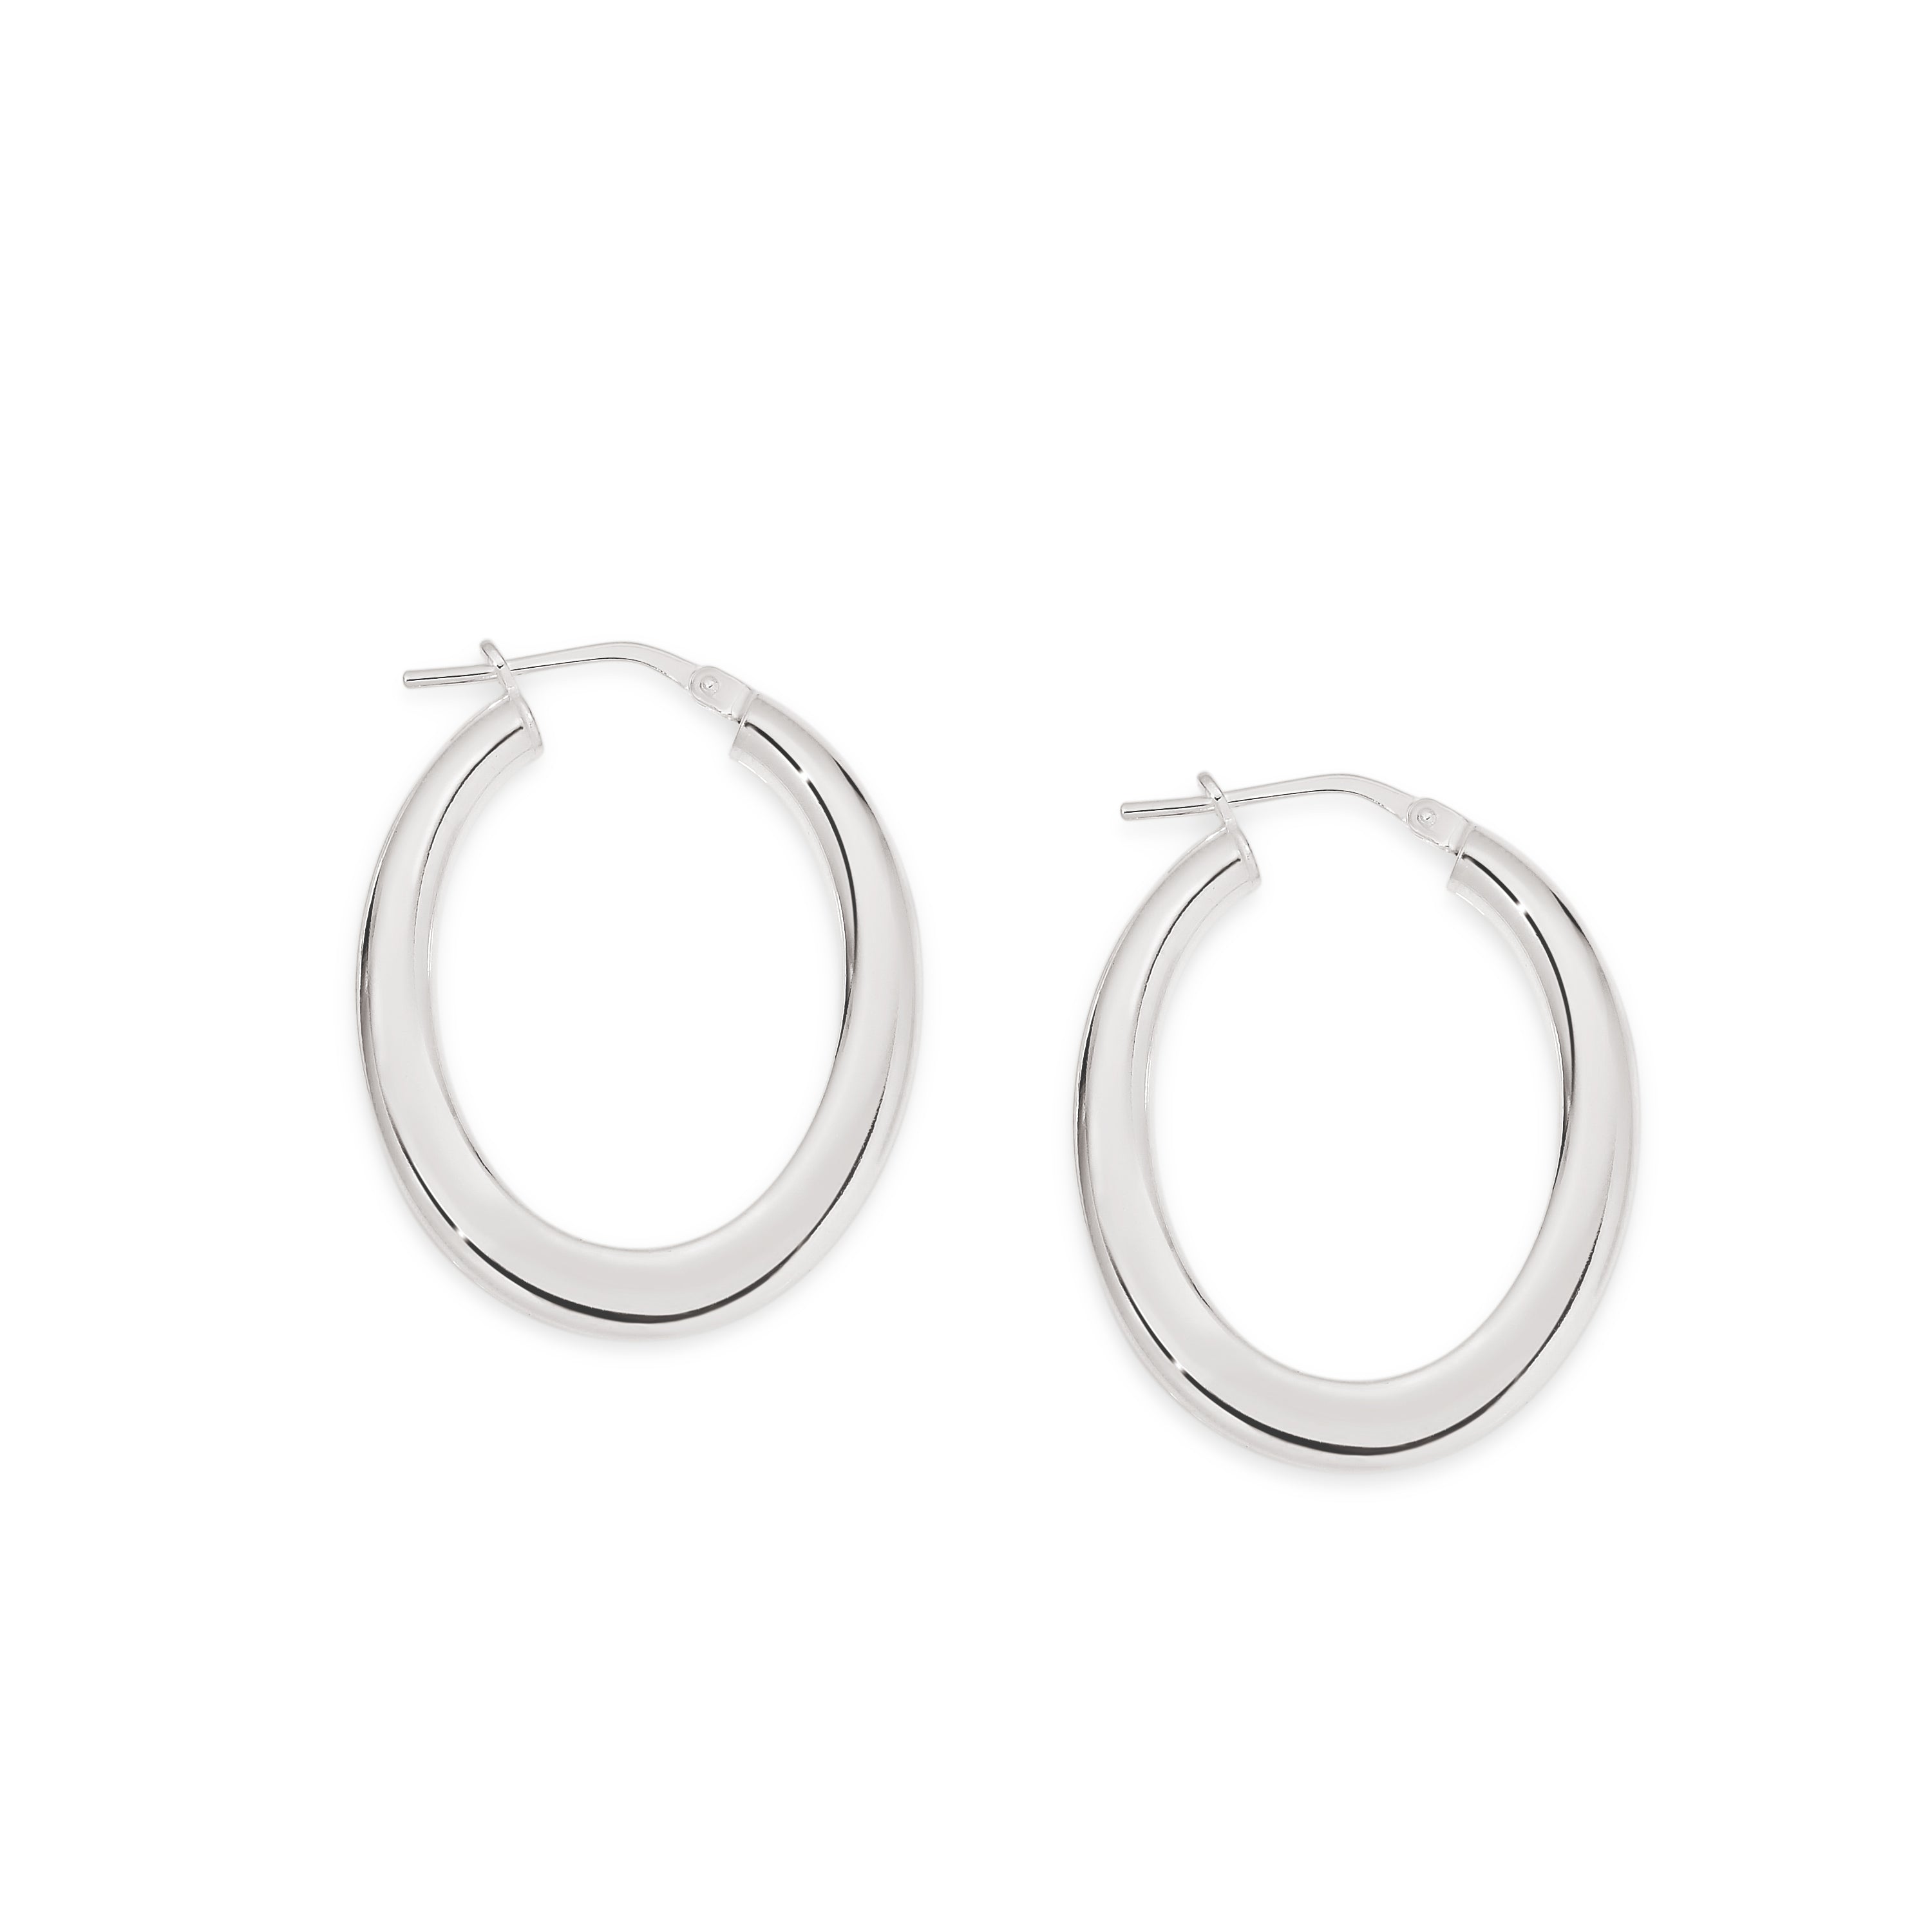 Silver tapered hoops 15x20mm oval